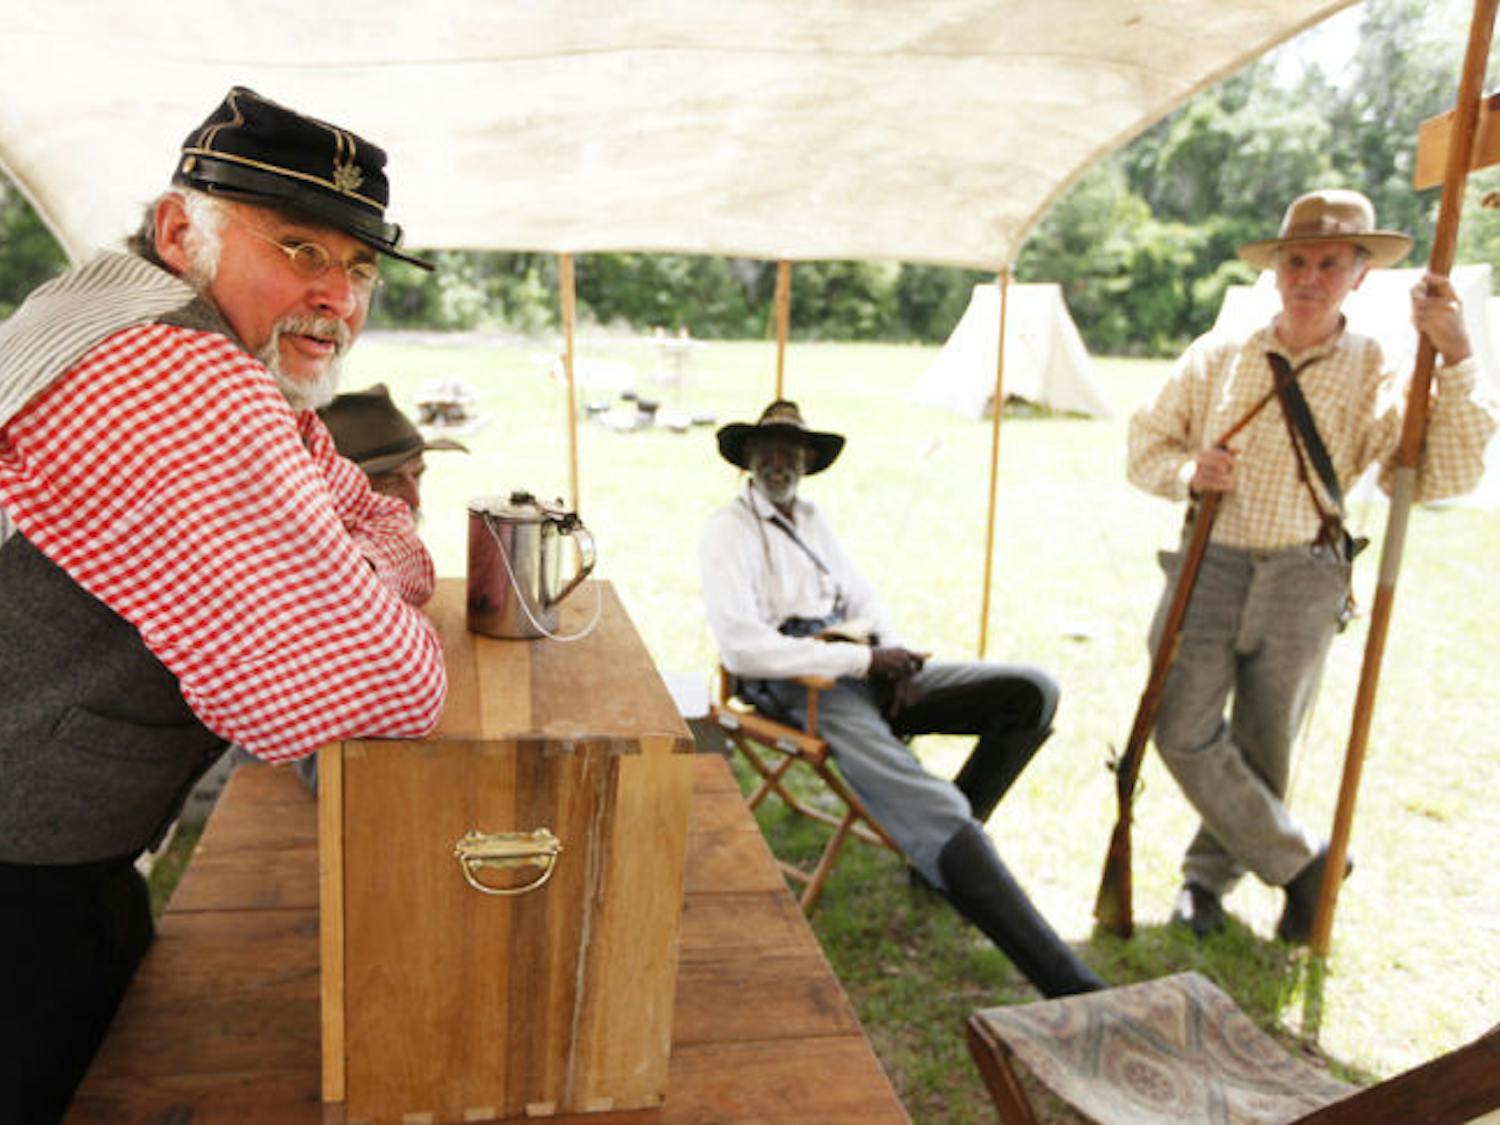 Maj. Thomas Sanders takes a break with fellow Civil War re-enactors at the 7th Florida Infantry Regiment Muster at Dudley Farm Historic State Park on Friday morning.